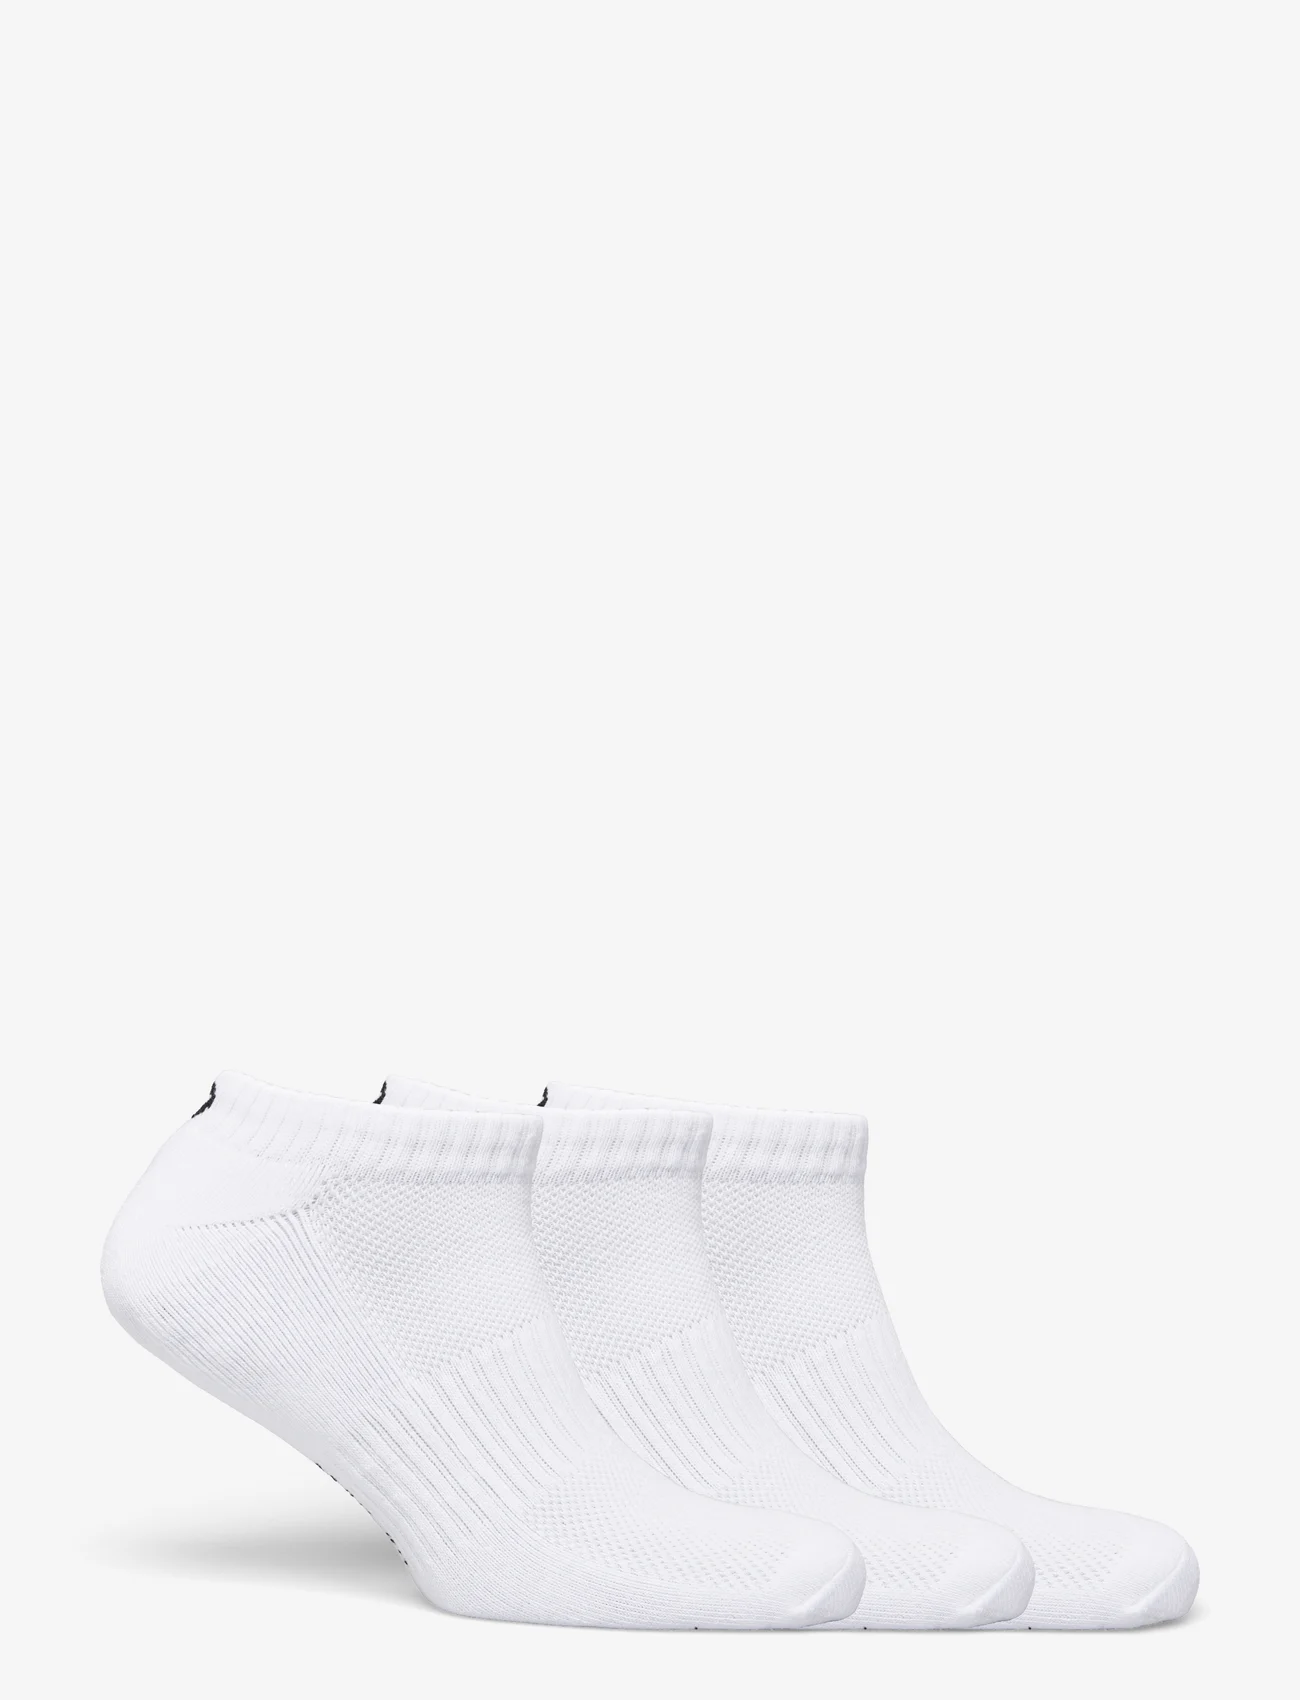 BACKTEE - BACKTEE LowCut Sock (1x3 pairs) - lowest prices - optical white - 1